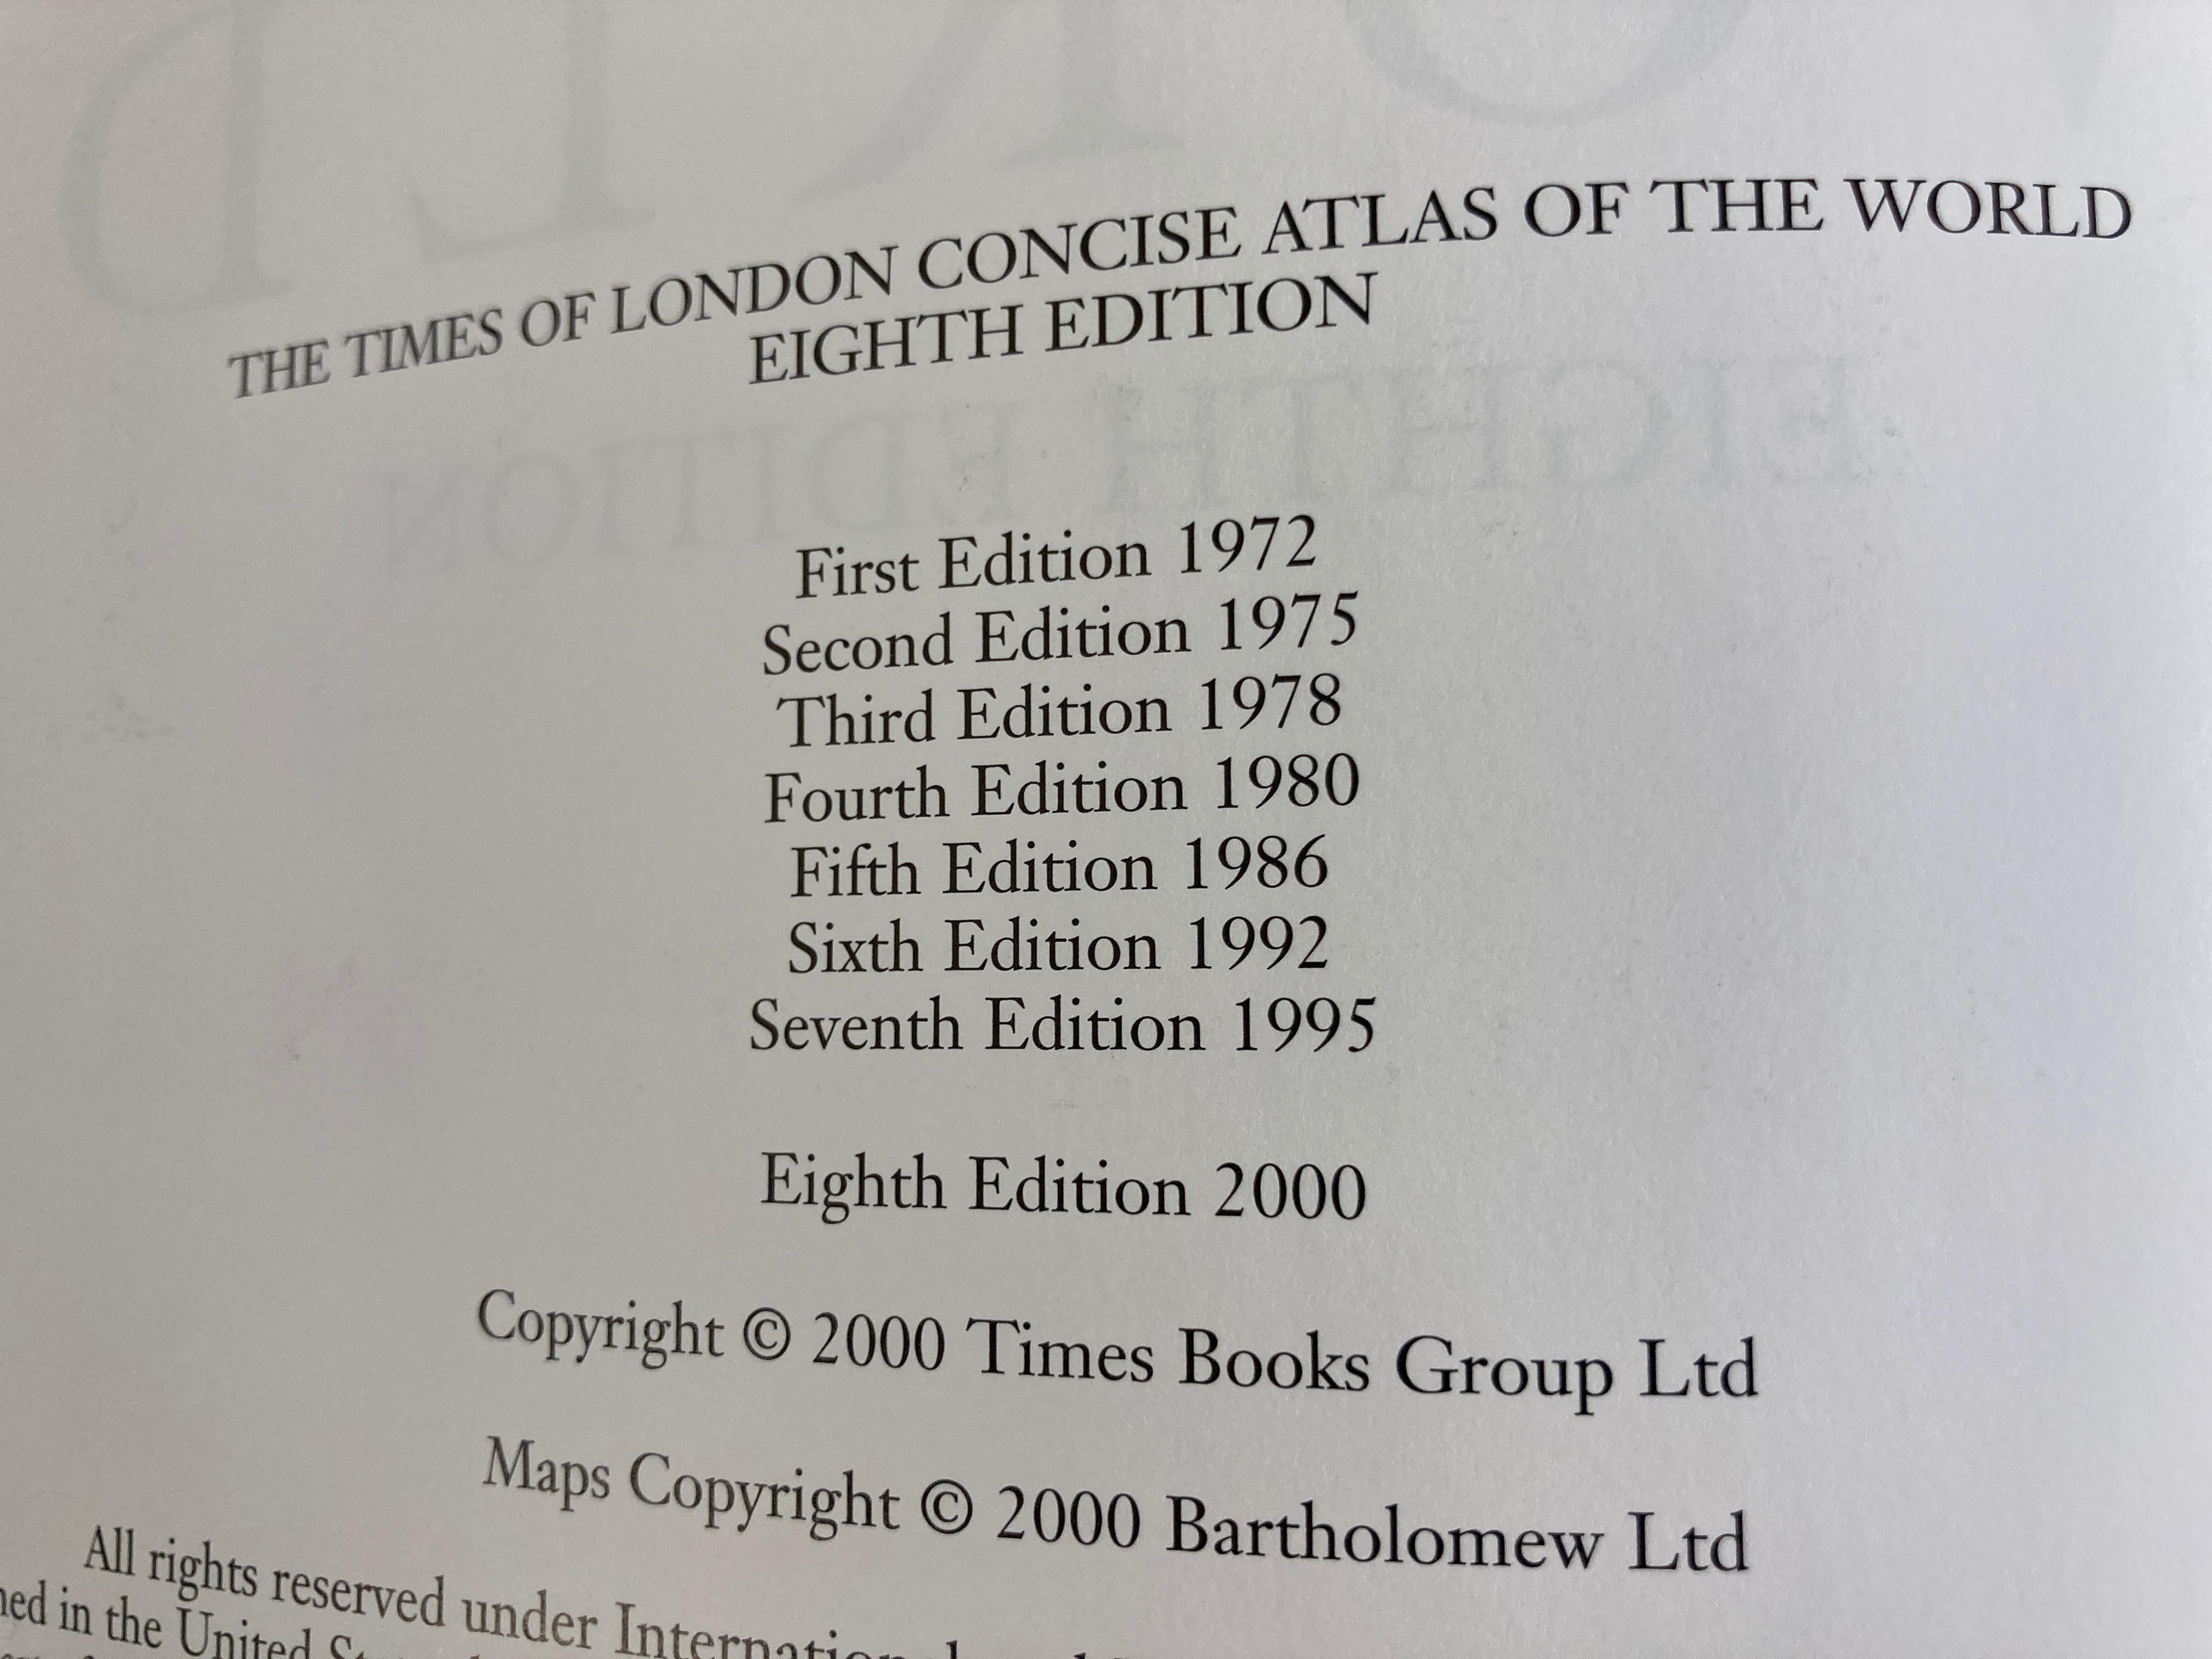 20th Century The Times of London Concise Atlas of the World Book